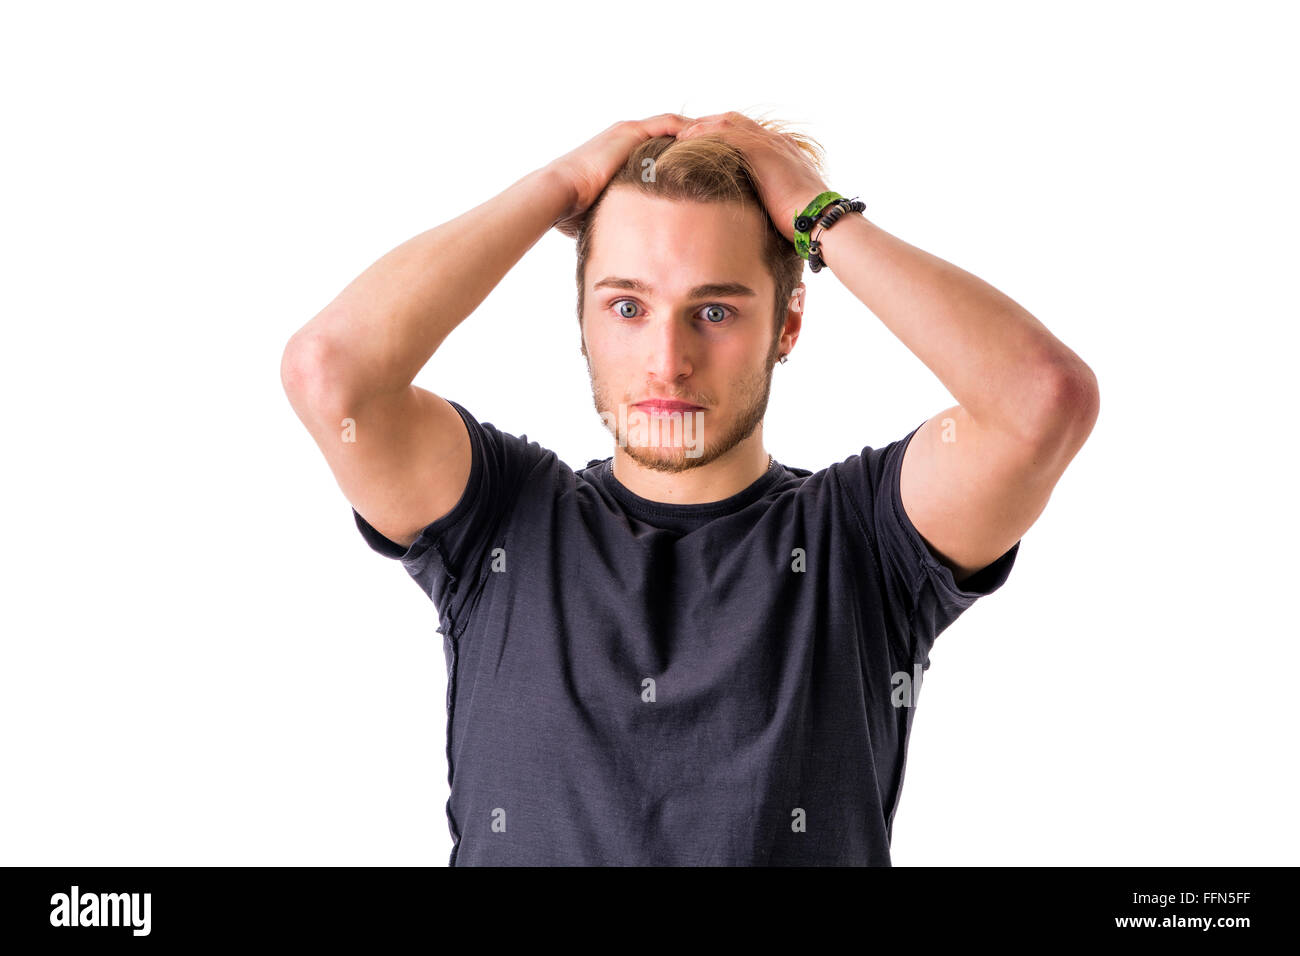 Young bearded man with hands on head looks puzzled. Isolated, white background. Stock Photo